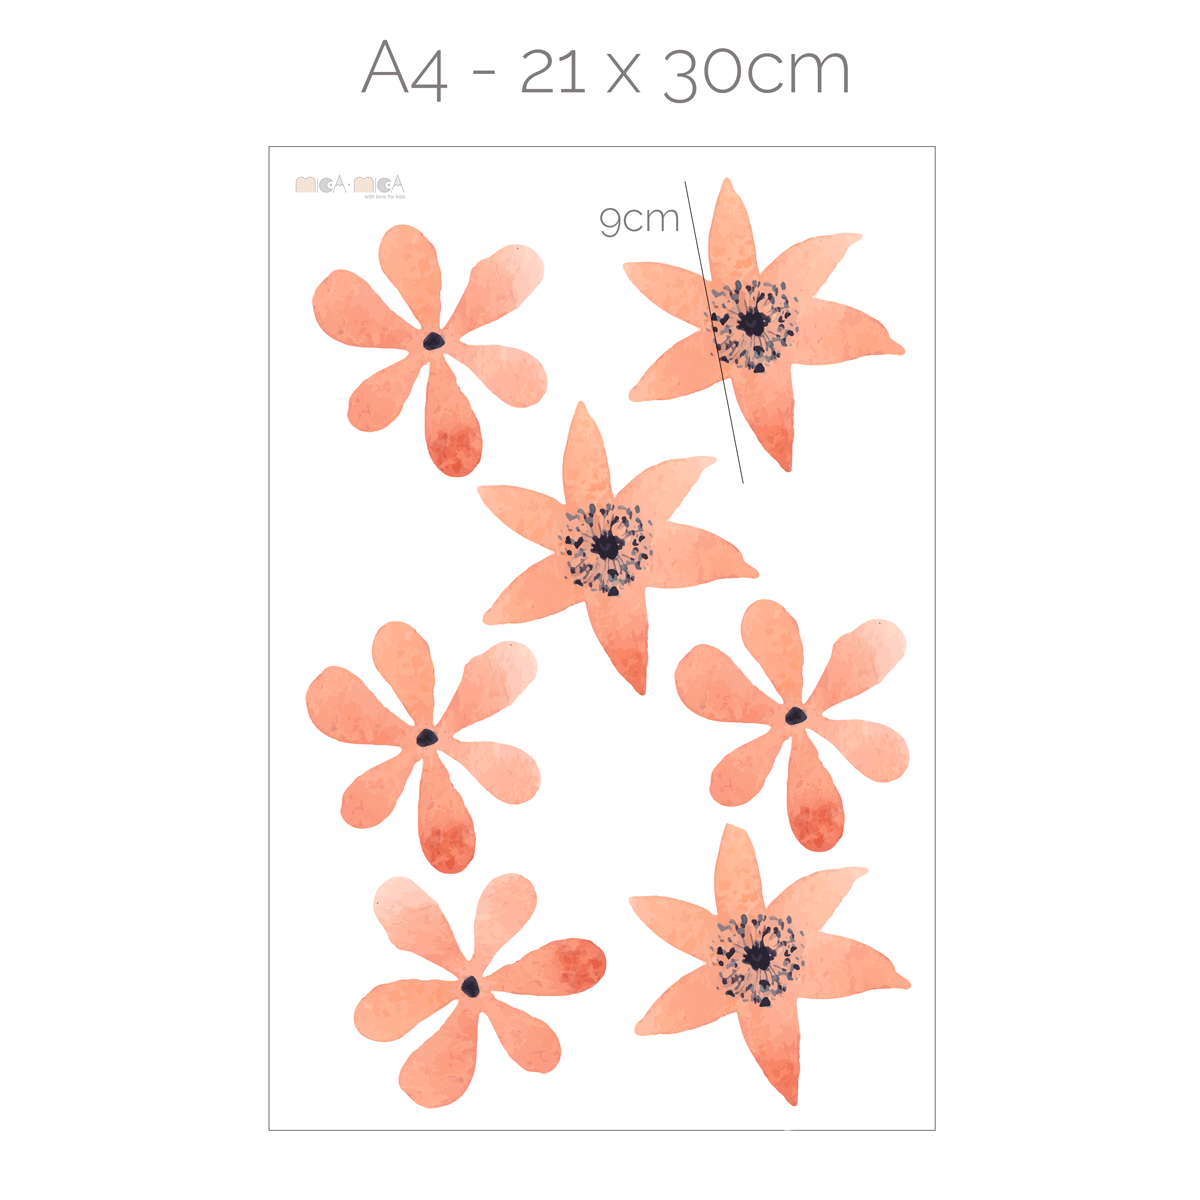 Flower wall stickers - Coral pastel